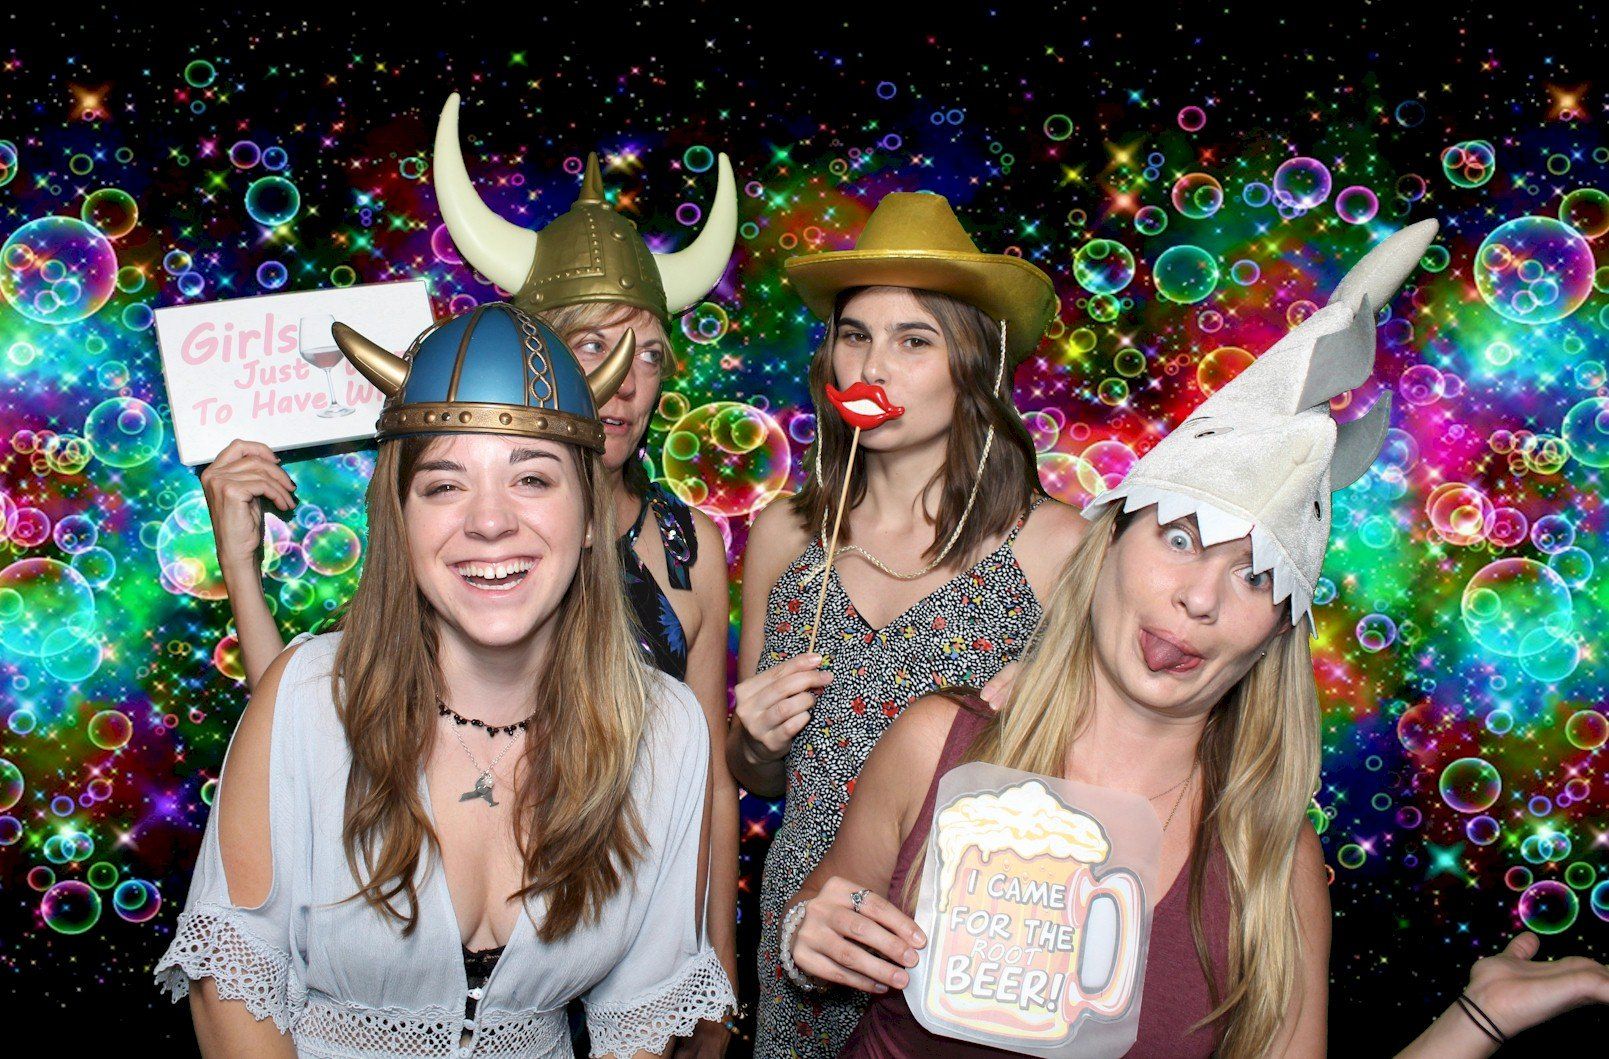 green screen photo booth rentals near me gloucester salem tewkesbury lawrence wellesley MA